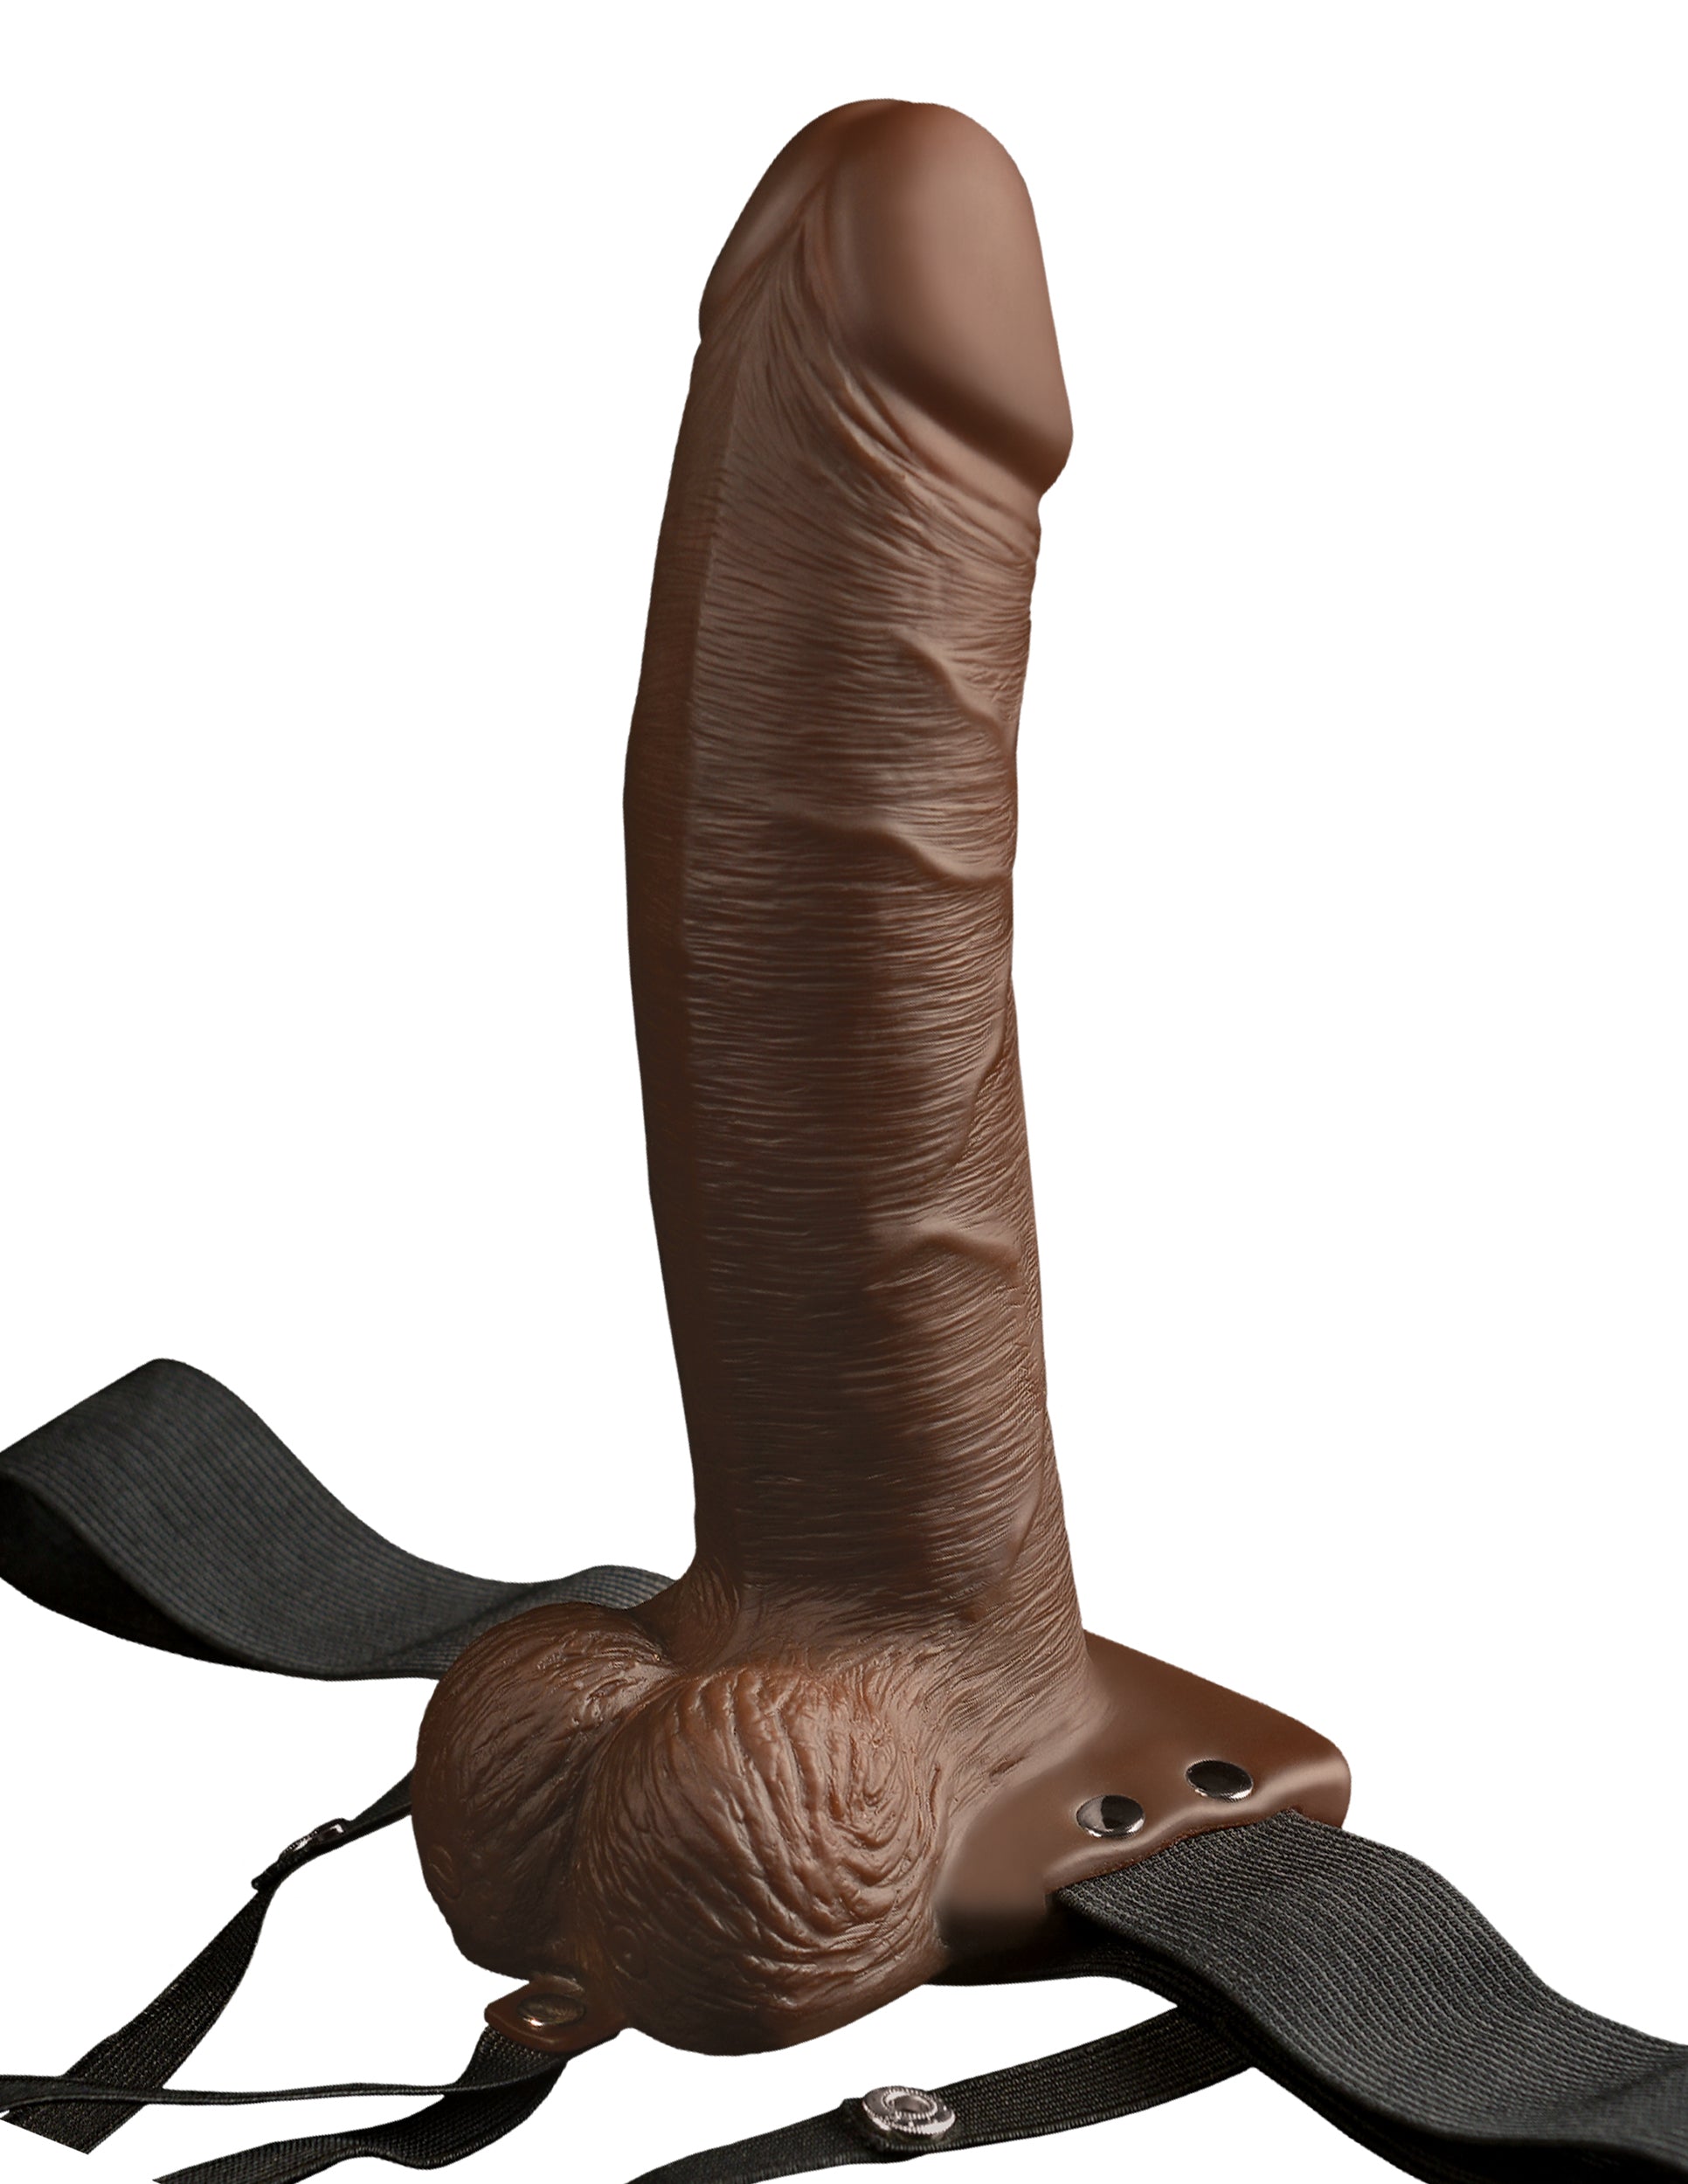 Fetish Fantasy Series 8" Hollow Rechargeable Strap On W/remote - Brown